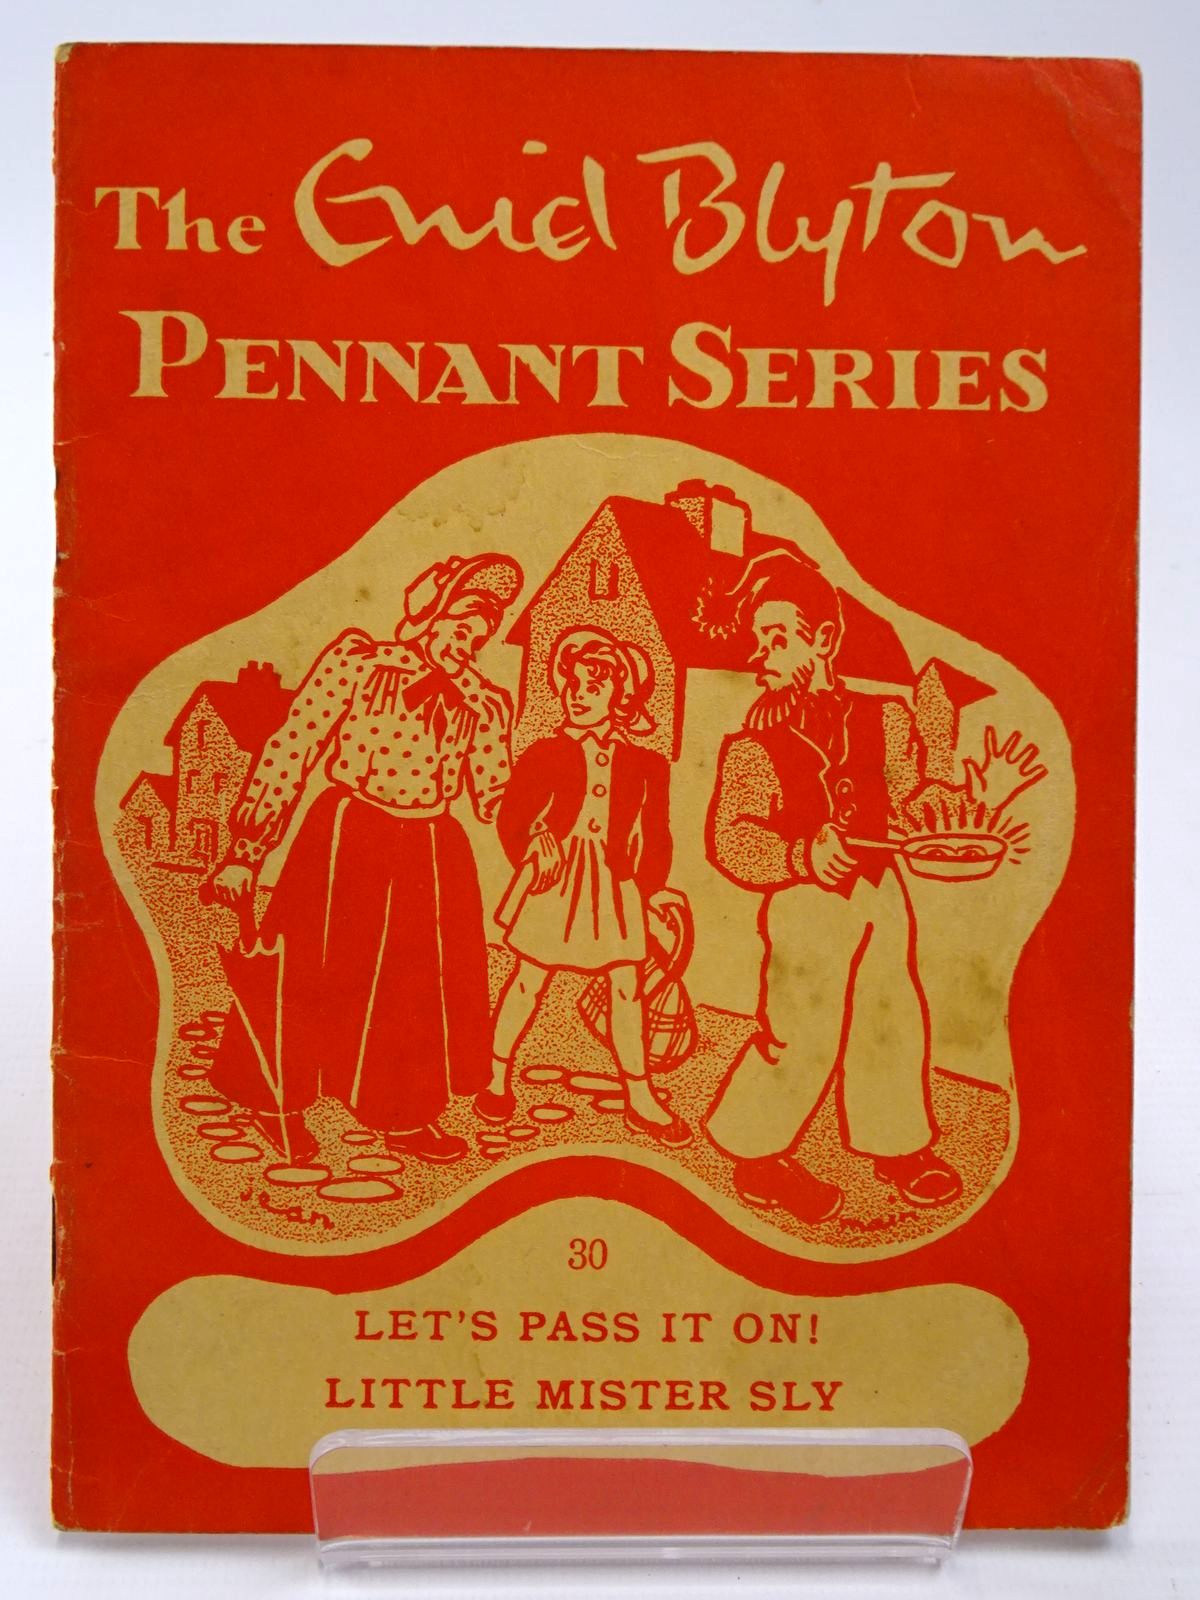 Photo of THE ENID BLYTON PENNANT SERIES No. 30 LET'S PASS IT ON! / LITTLE MISTER SLY written by Blyton, Enid illustrated by Soper, Eileen Main, Jean published by Macmillan &amp; Co. Ltd. (STOCK CODE: 2130525)  for sale by Stella & Rose's Books